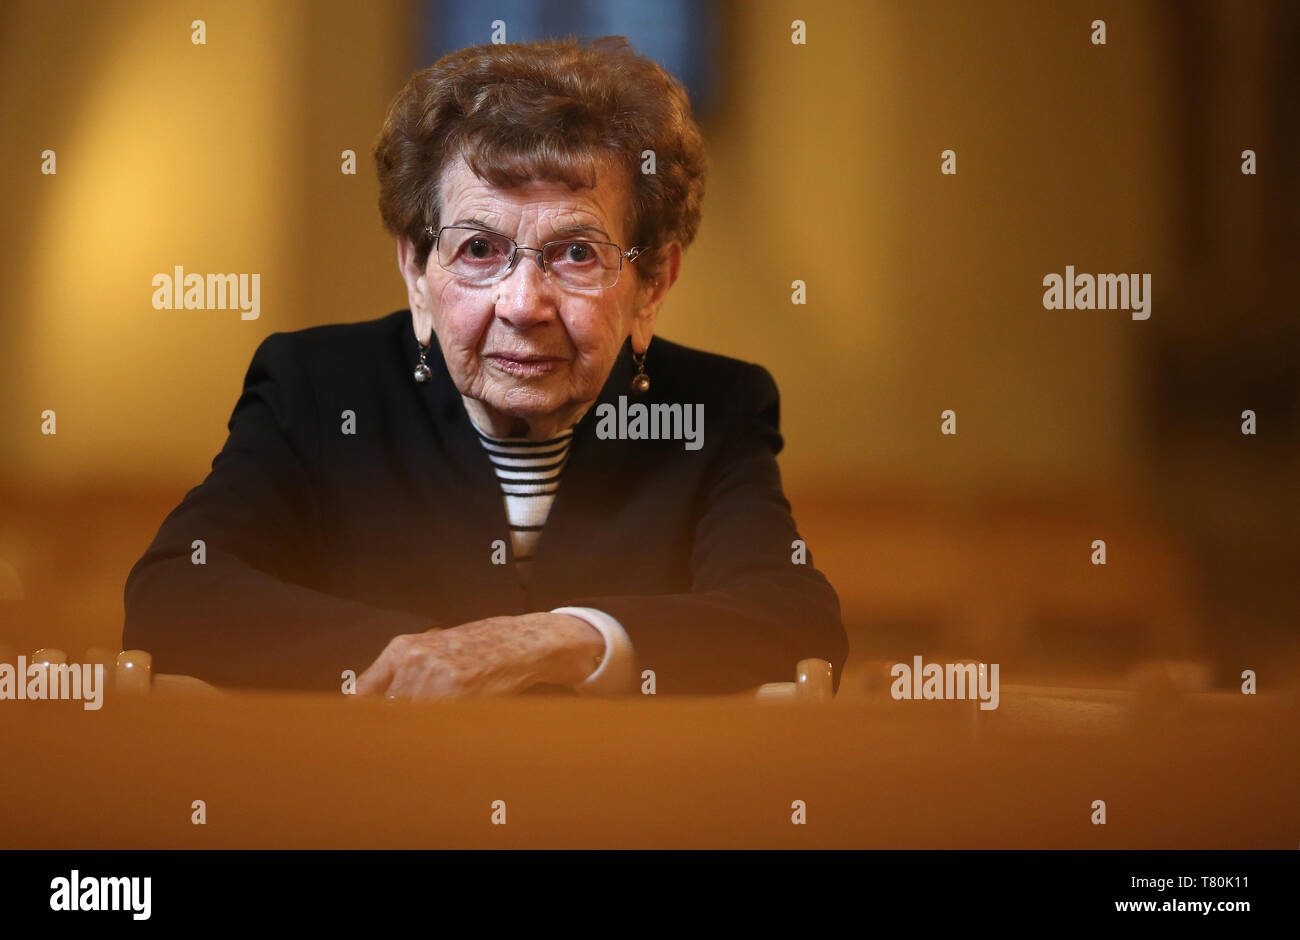 09 May 2019, Saxony-Anhalt, Magdeburg: Holocaust survivor Batsheva Dagan (93 years old) sits in Magdeburg Cathedral after a reading. Dagan read from her book 'Blessed be the imagination - cursed be it', with texts from her time in the three concentration camps Auschwitz, Ravensbrück and Malchow. Photo: Ronny Hartmann/dpa-Zentralbild/ZB Stock Photo